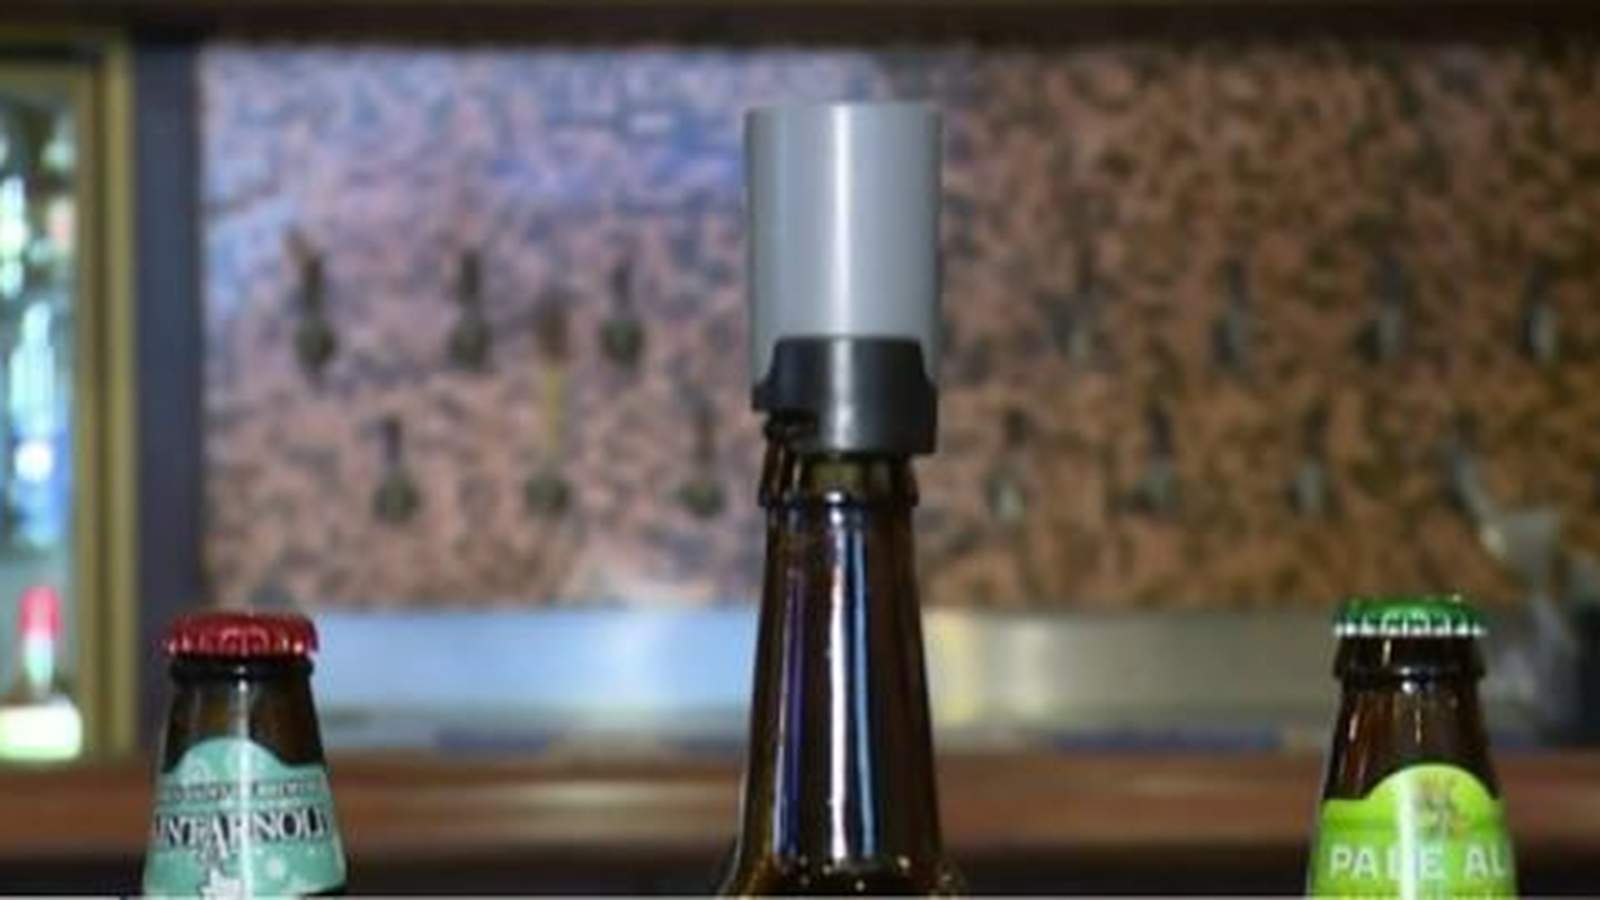 Test it Tuesday: Can $10 device turn bottled beer into draft beer?